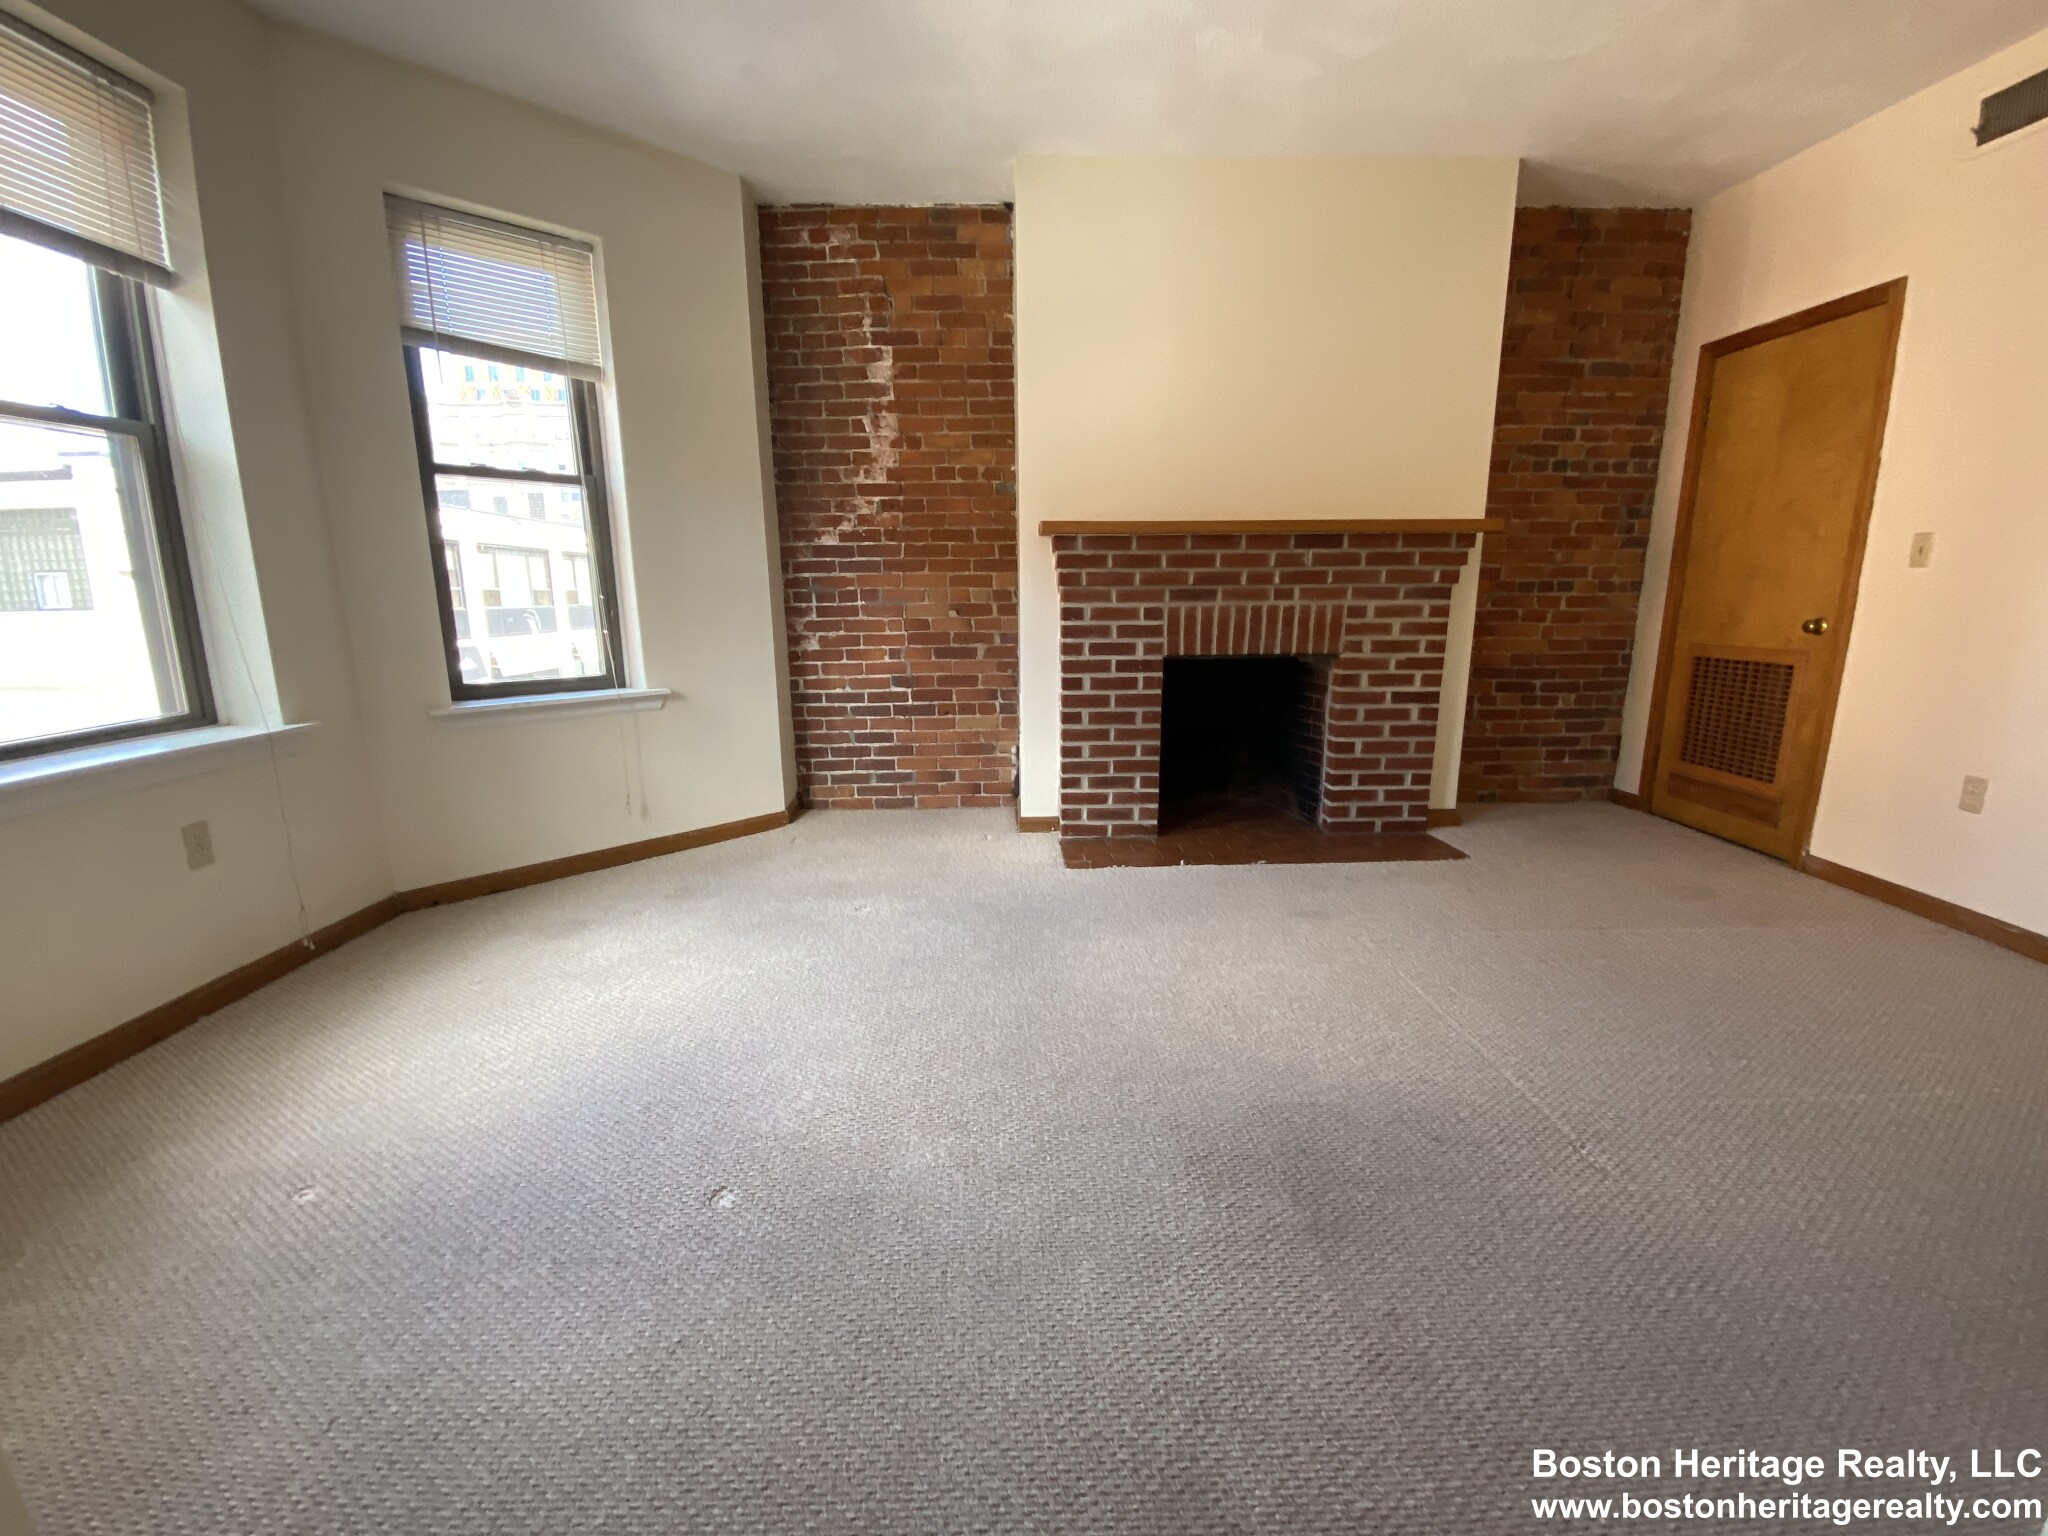 2 Beds, 1 Bath apartment in Boston, Fenway for $3,200